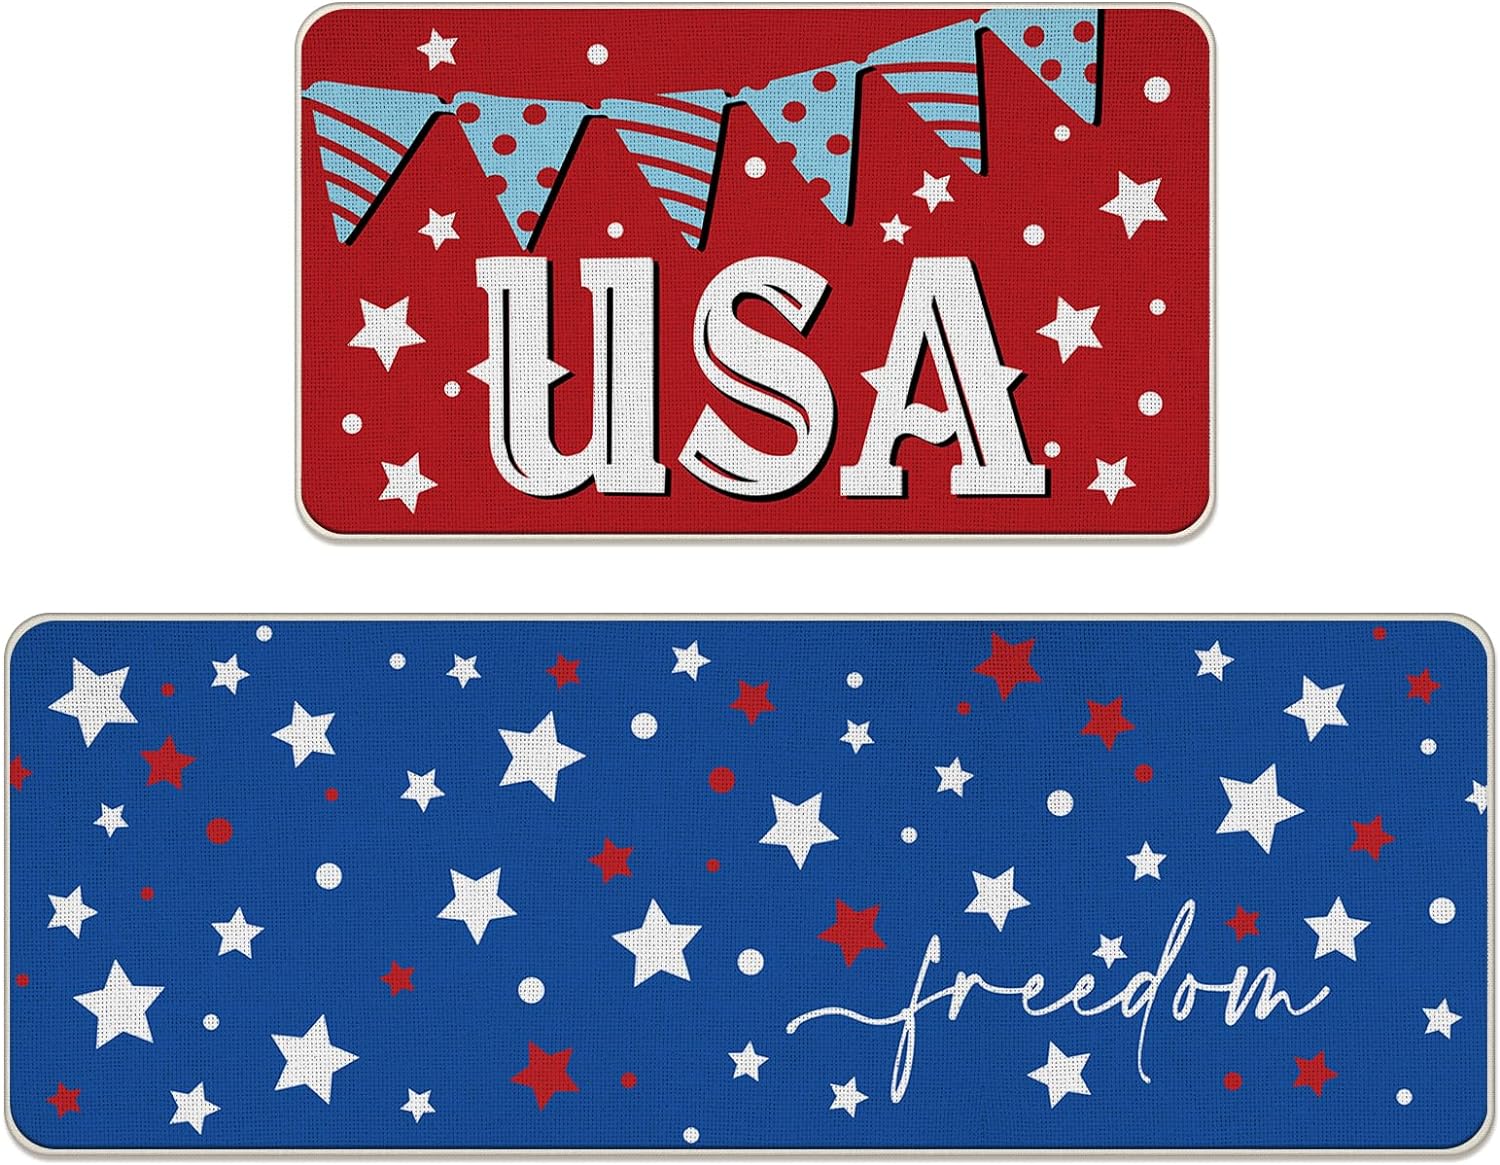 4th of July USA Patriotic Kitchen Rugs Set of 2, America Freedom Red Blue Stars Polka Dot Flag Kitchen Mats Decor, American Floor Door Mat Home Decorations -17×29 and 17×47 Inch